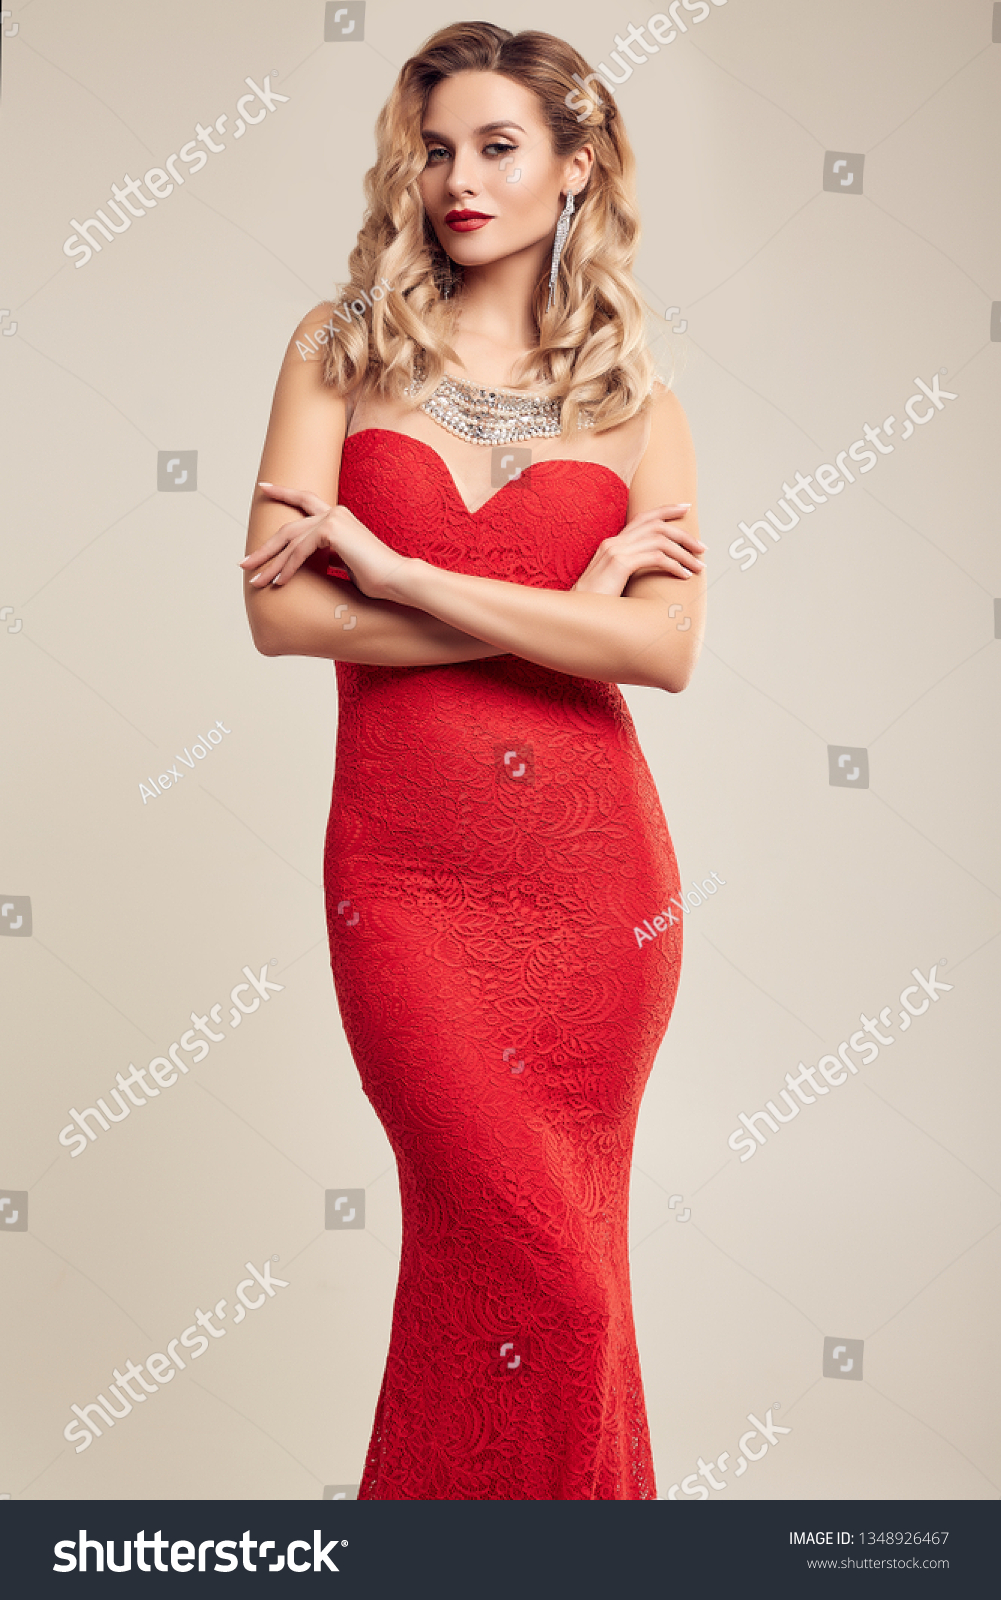 Portrait of gorgeous elegant sensual blonde woman wearing fashion red dress isolated on white background #1348926467